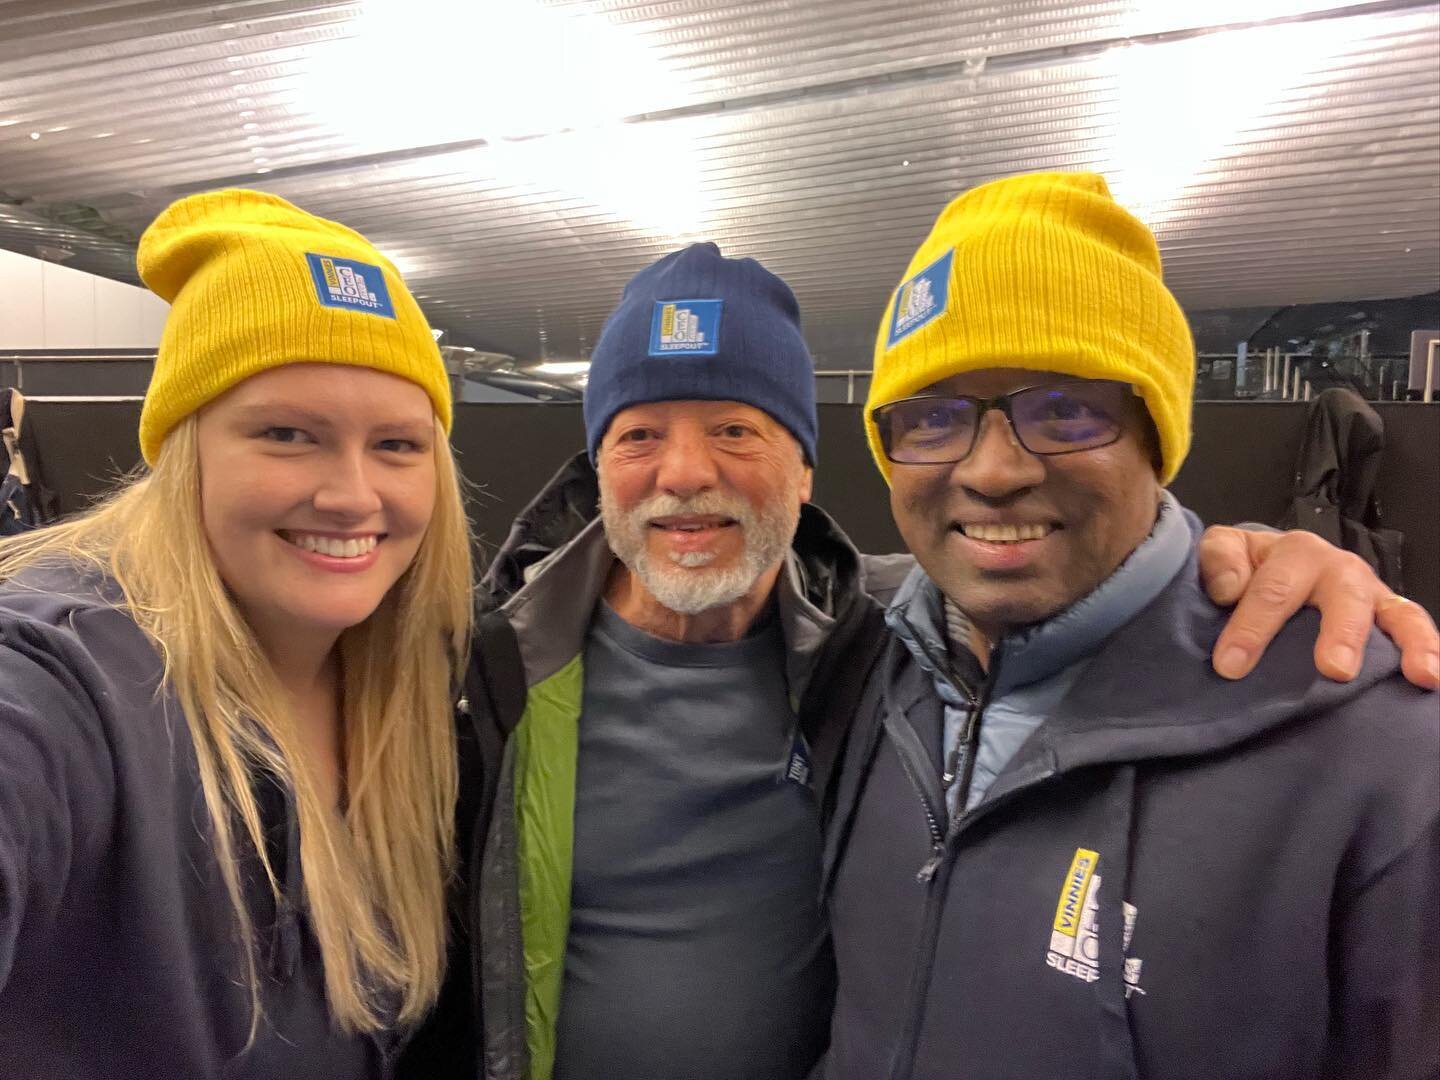 The Merc Capital team at the NSW Vinnies CEO Sleepout.  This year, Merc Capital are a Sponsor of the Vinnies CEO Sleepout, and our CEO, Tony Merhi, will be sleeping out to raise additional funds to support those in need. 

Vinnies provides counsellin